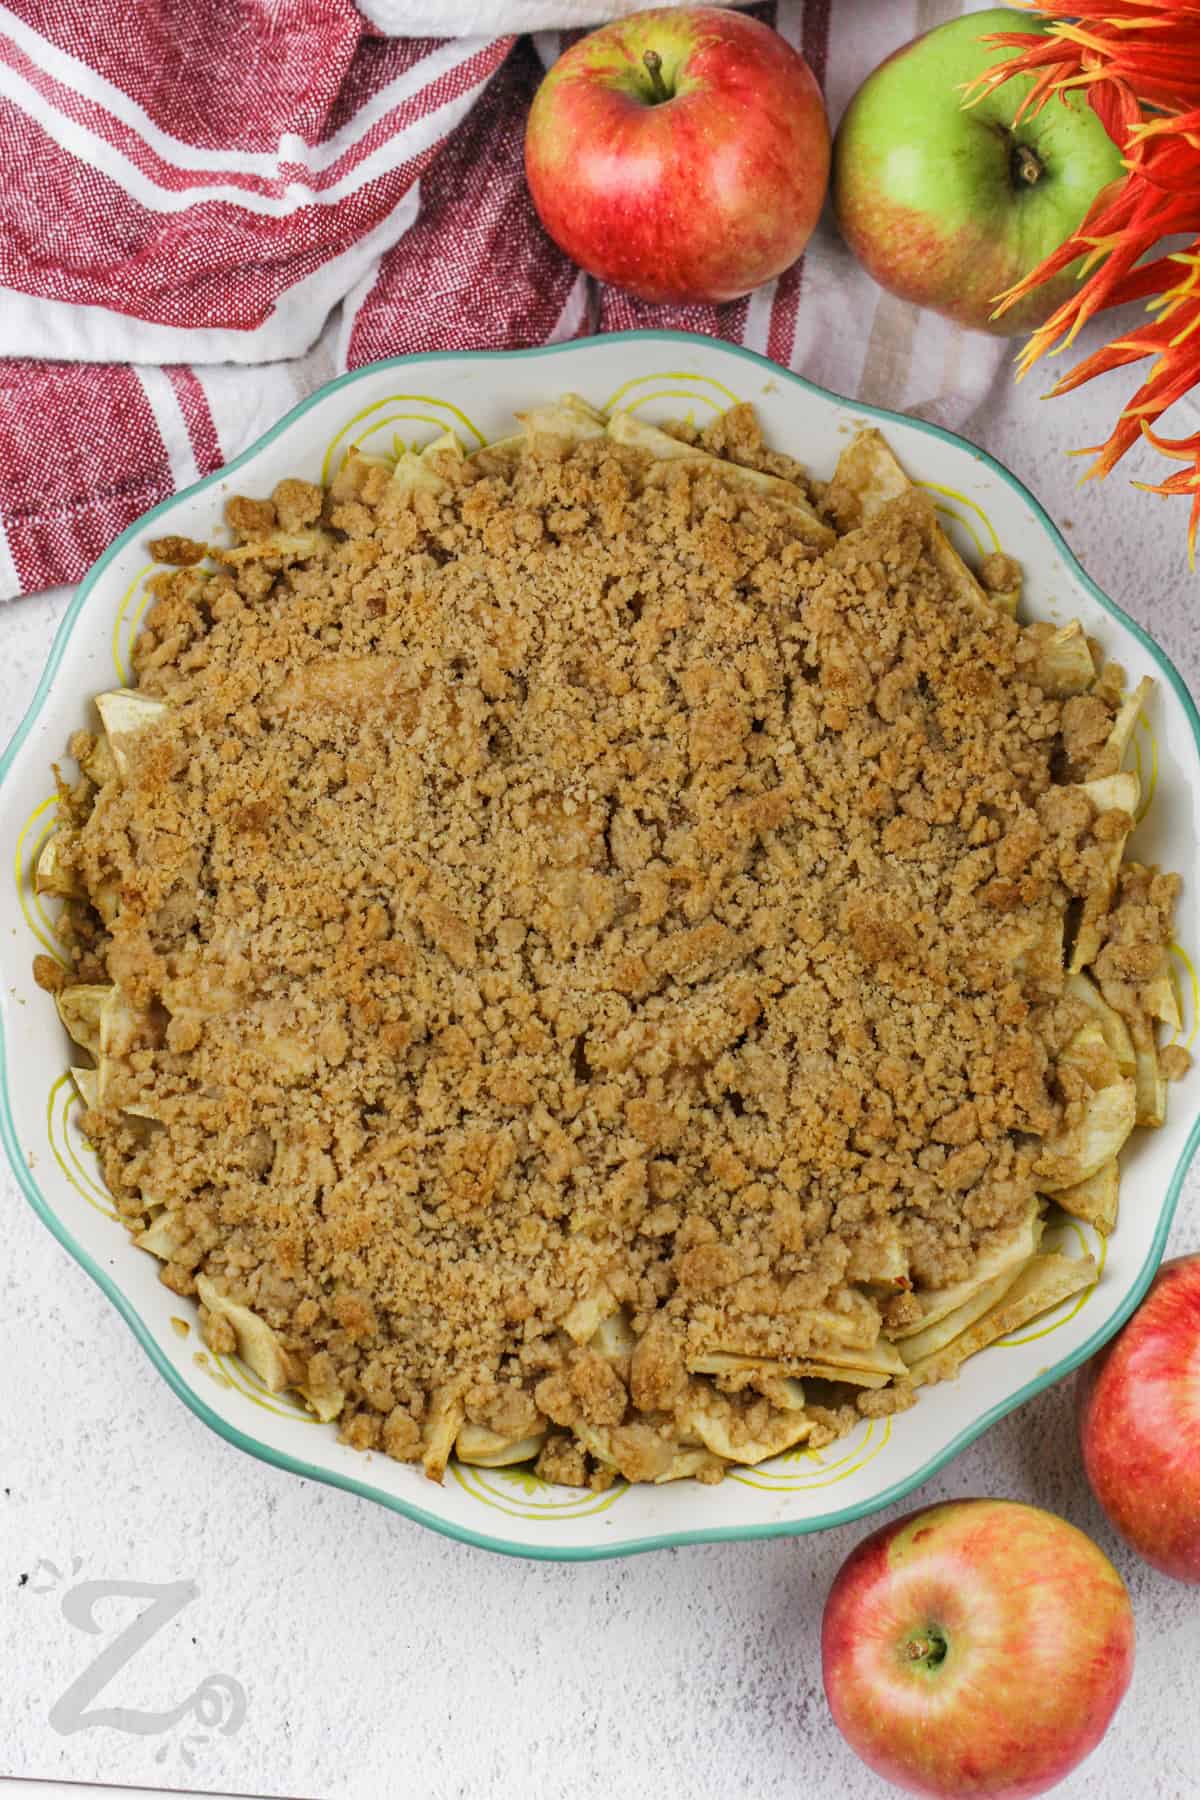 baked Apple Crumble in a dish